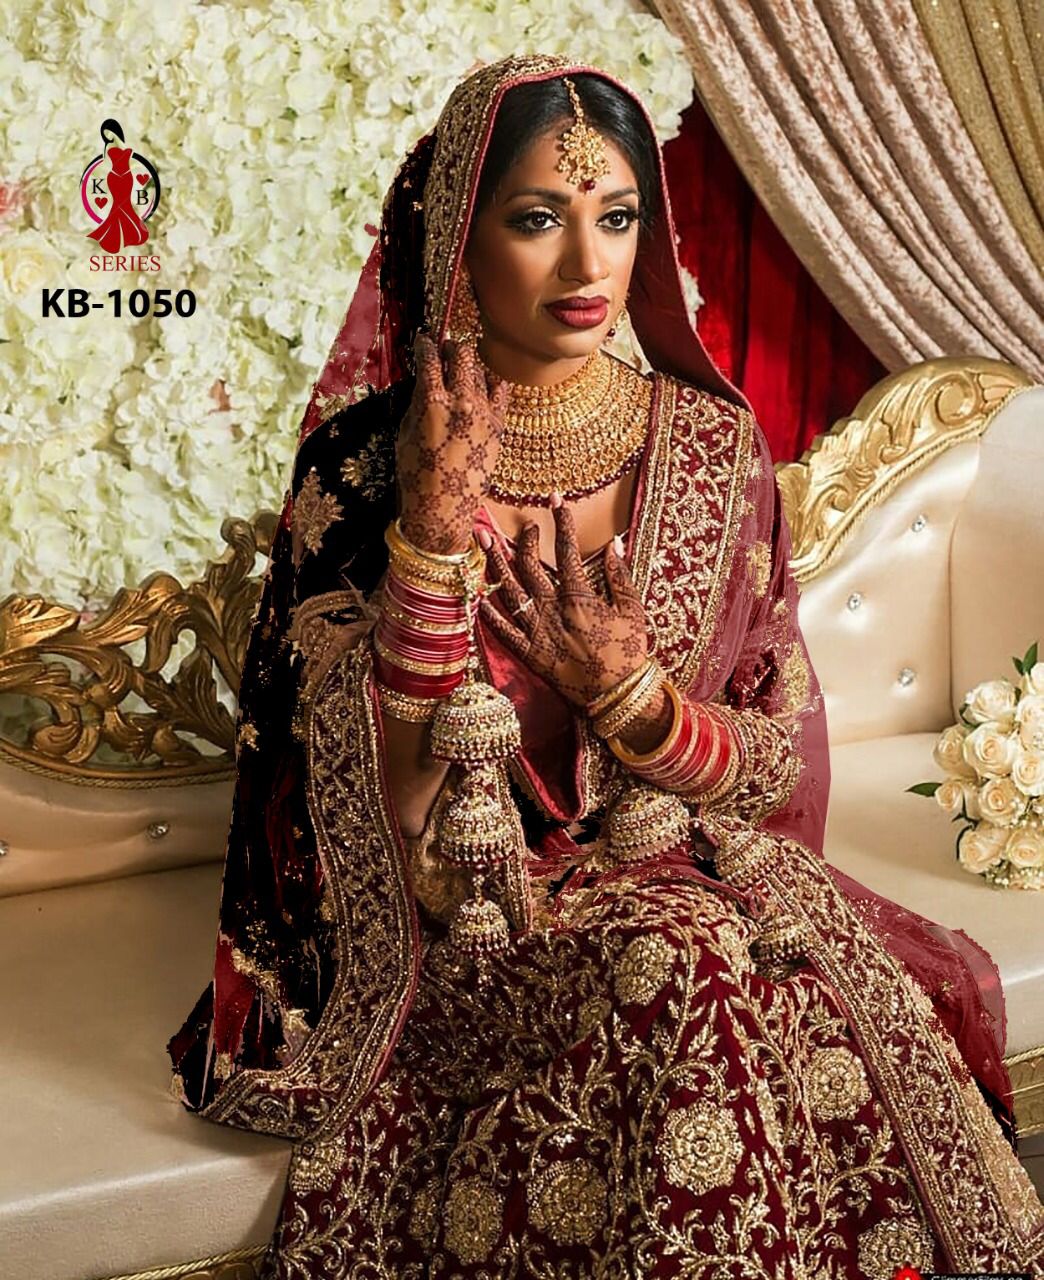 Bridal Gown In Surat, Gujarat At Best Price | Bridal Gown Manufacturers,  Suppliers In Surat